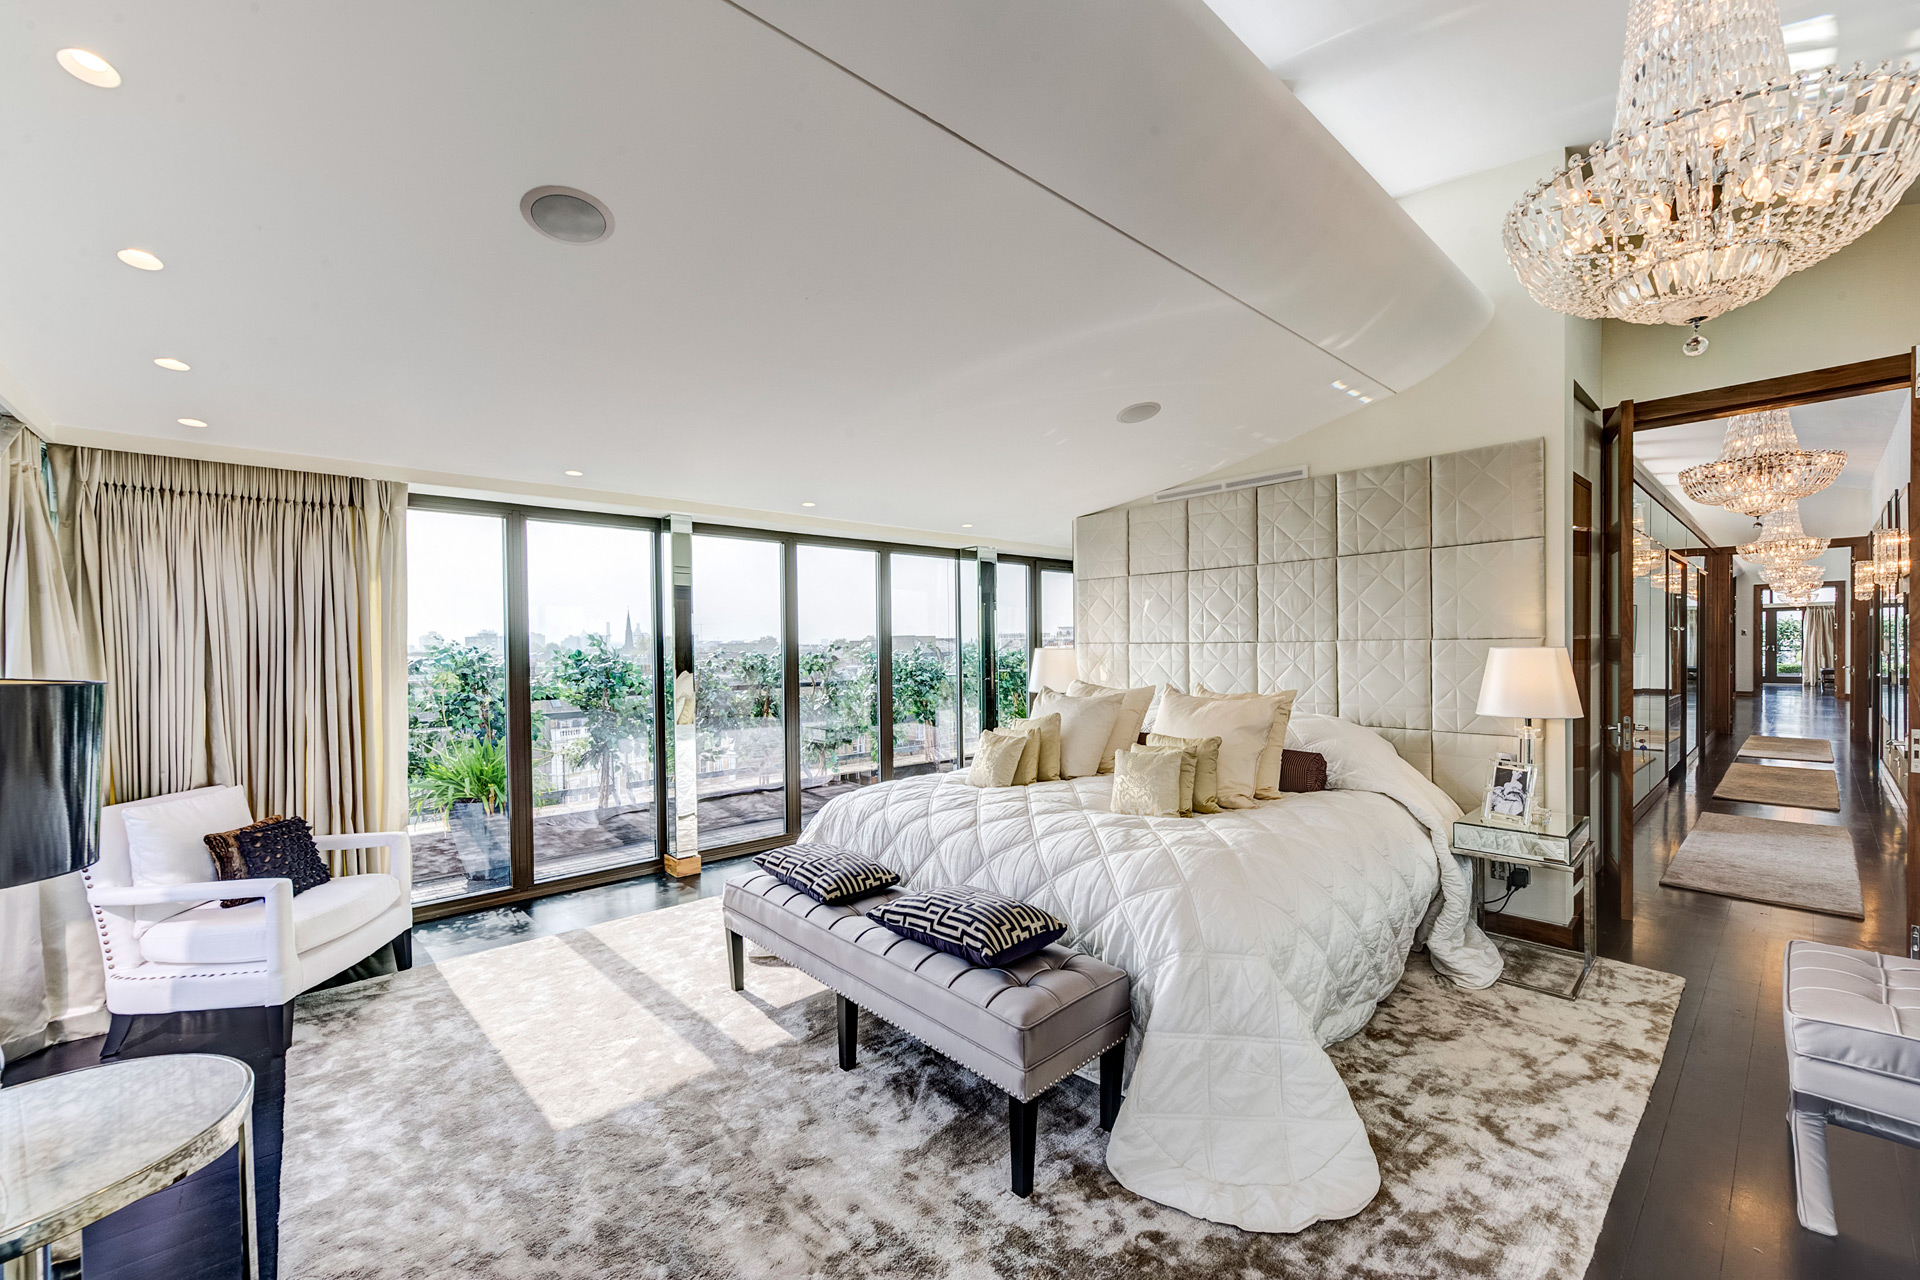 Penthouse bedroom with king size bed, gold accents and a chandelier.